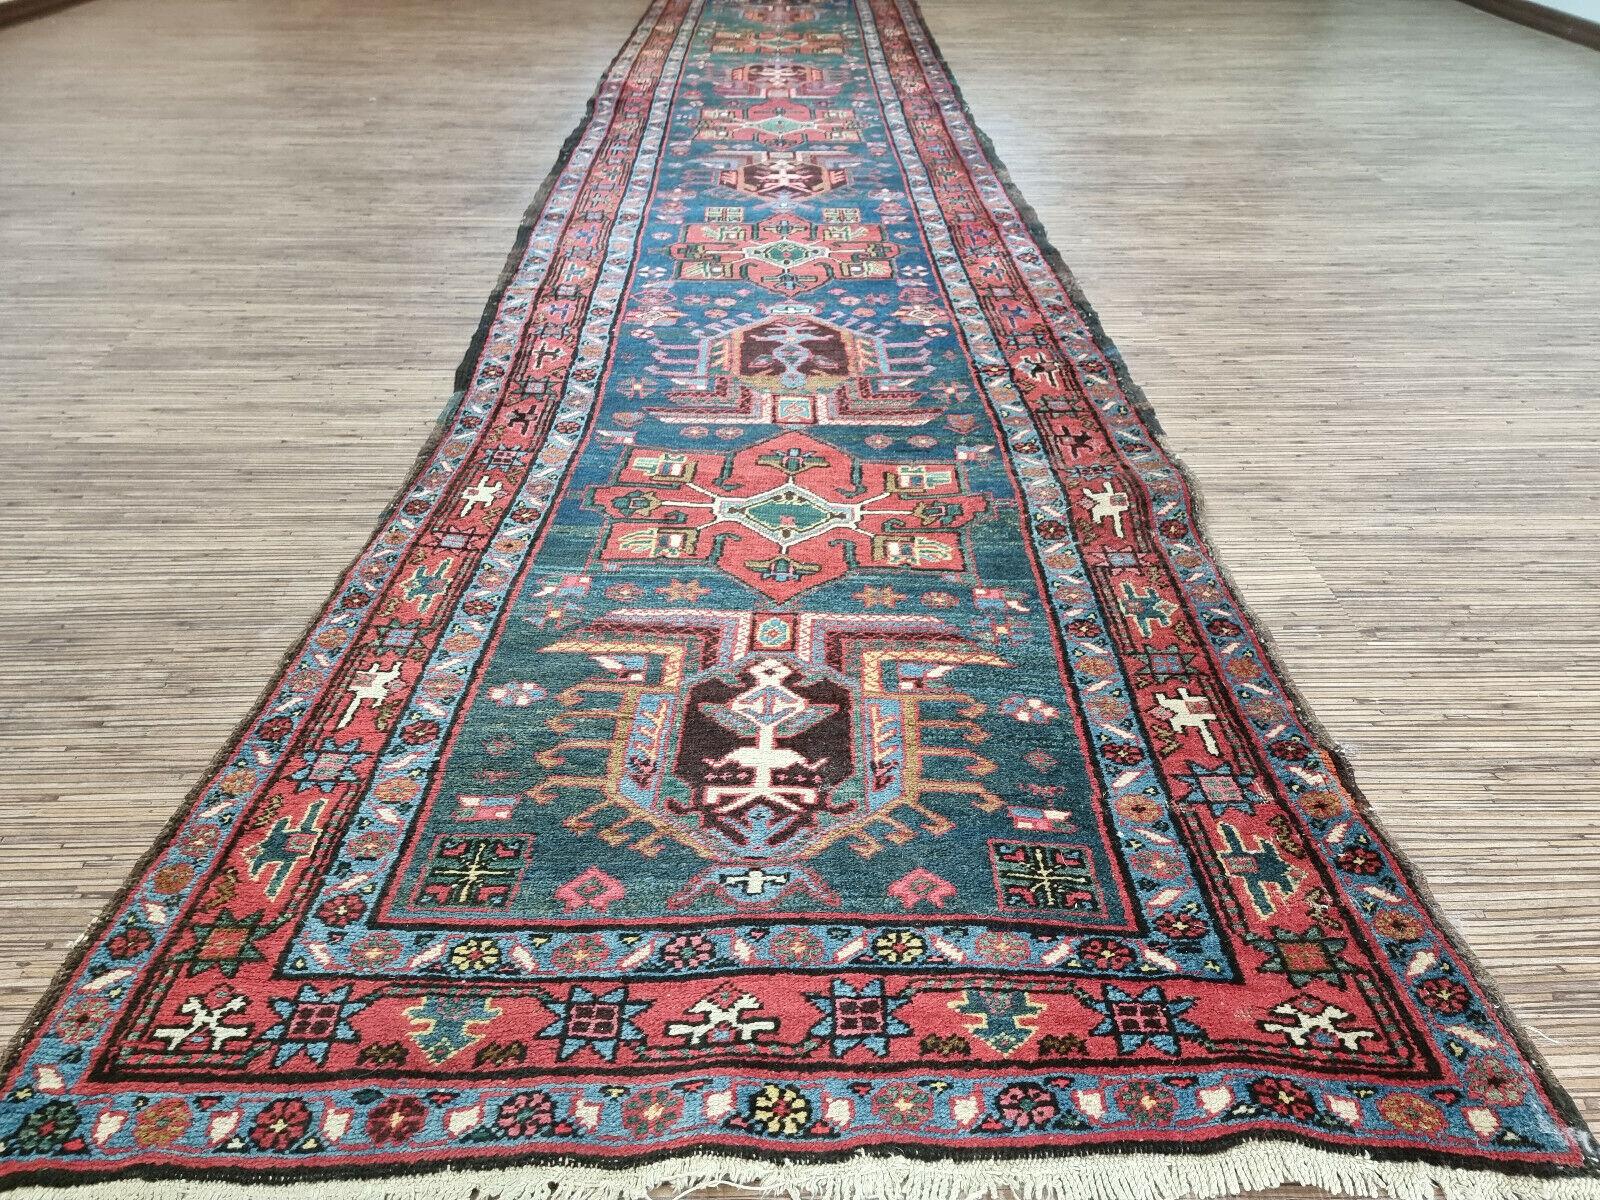 Hand-Knotted Handmade Antique Persian Style Heriz Runner Rug 2.8' x 13.7', 1900s - 1D80